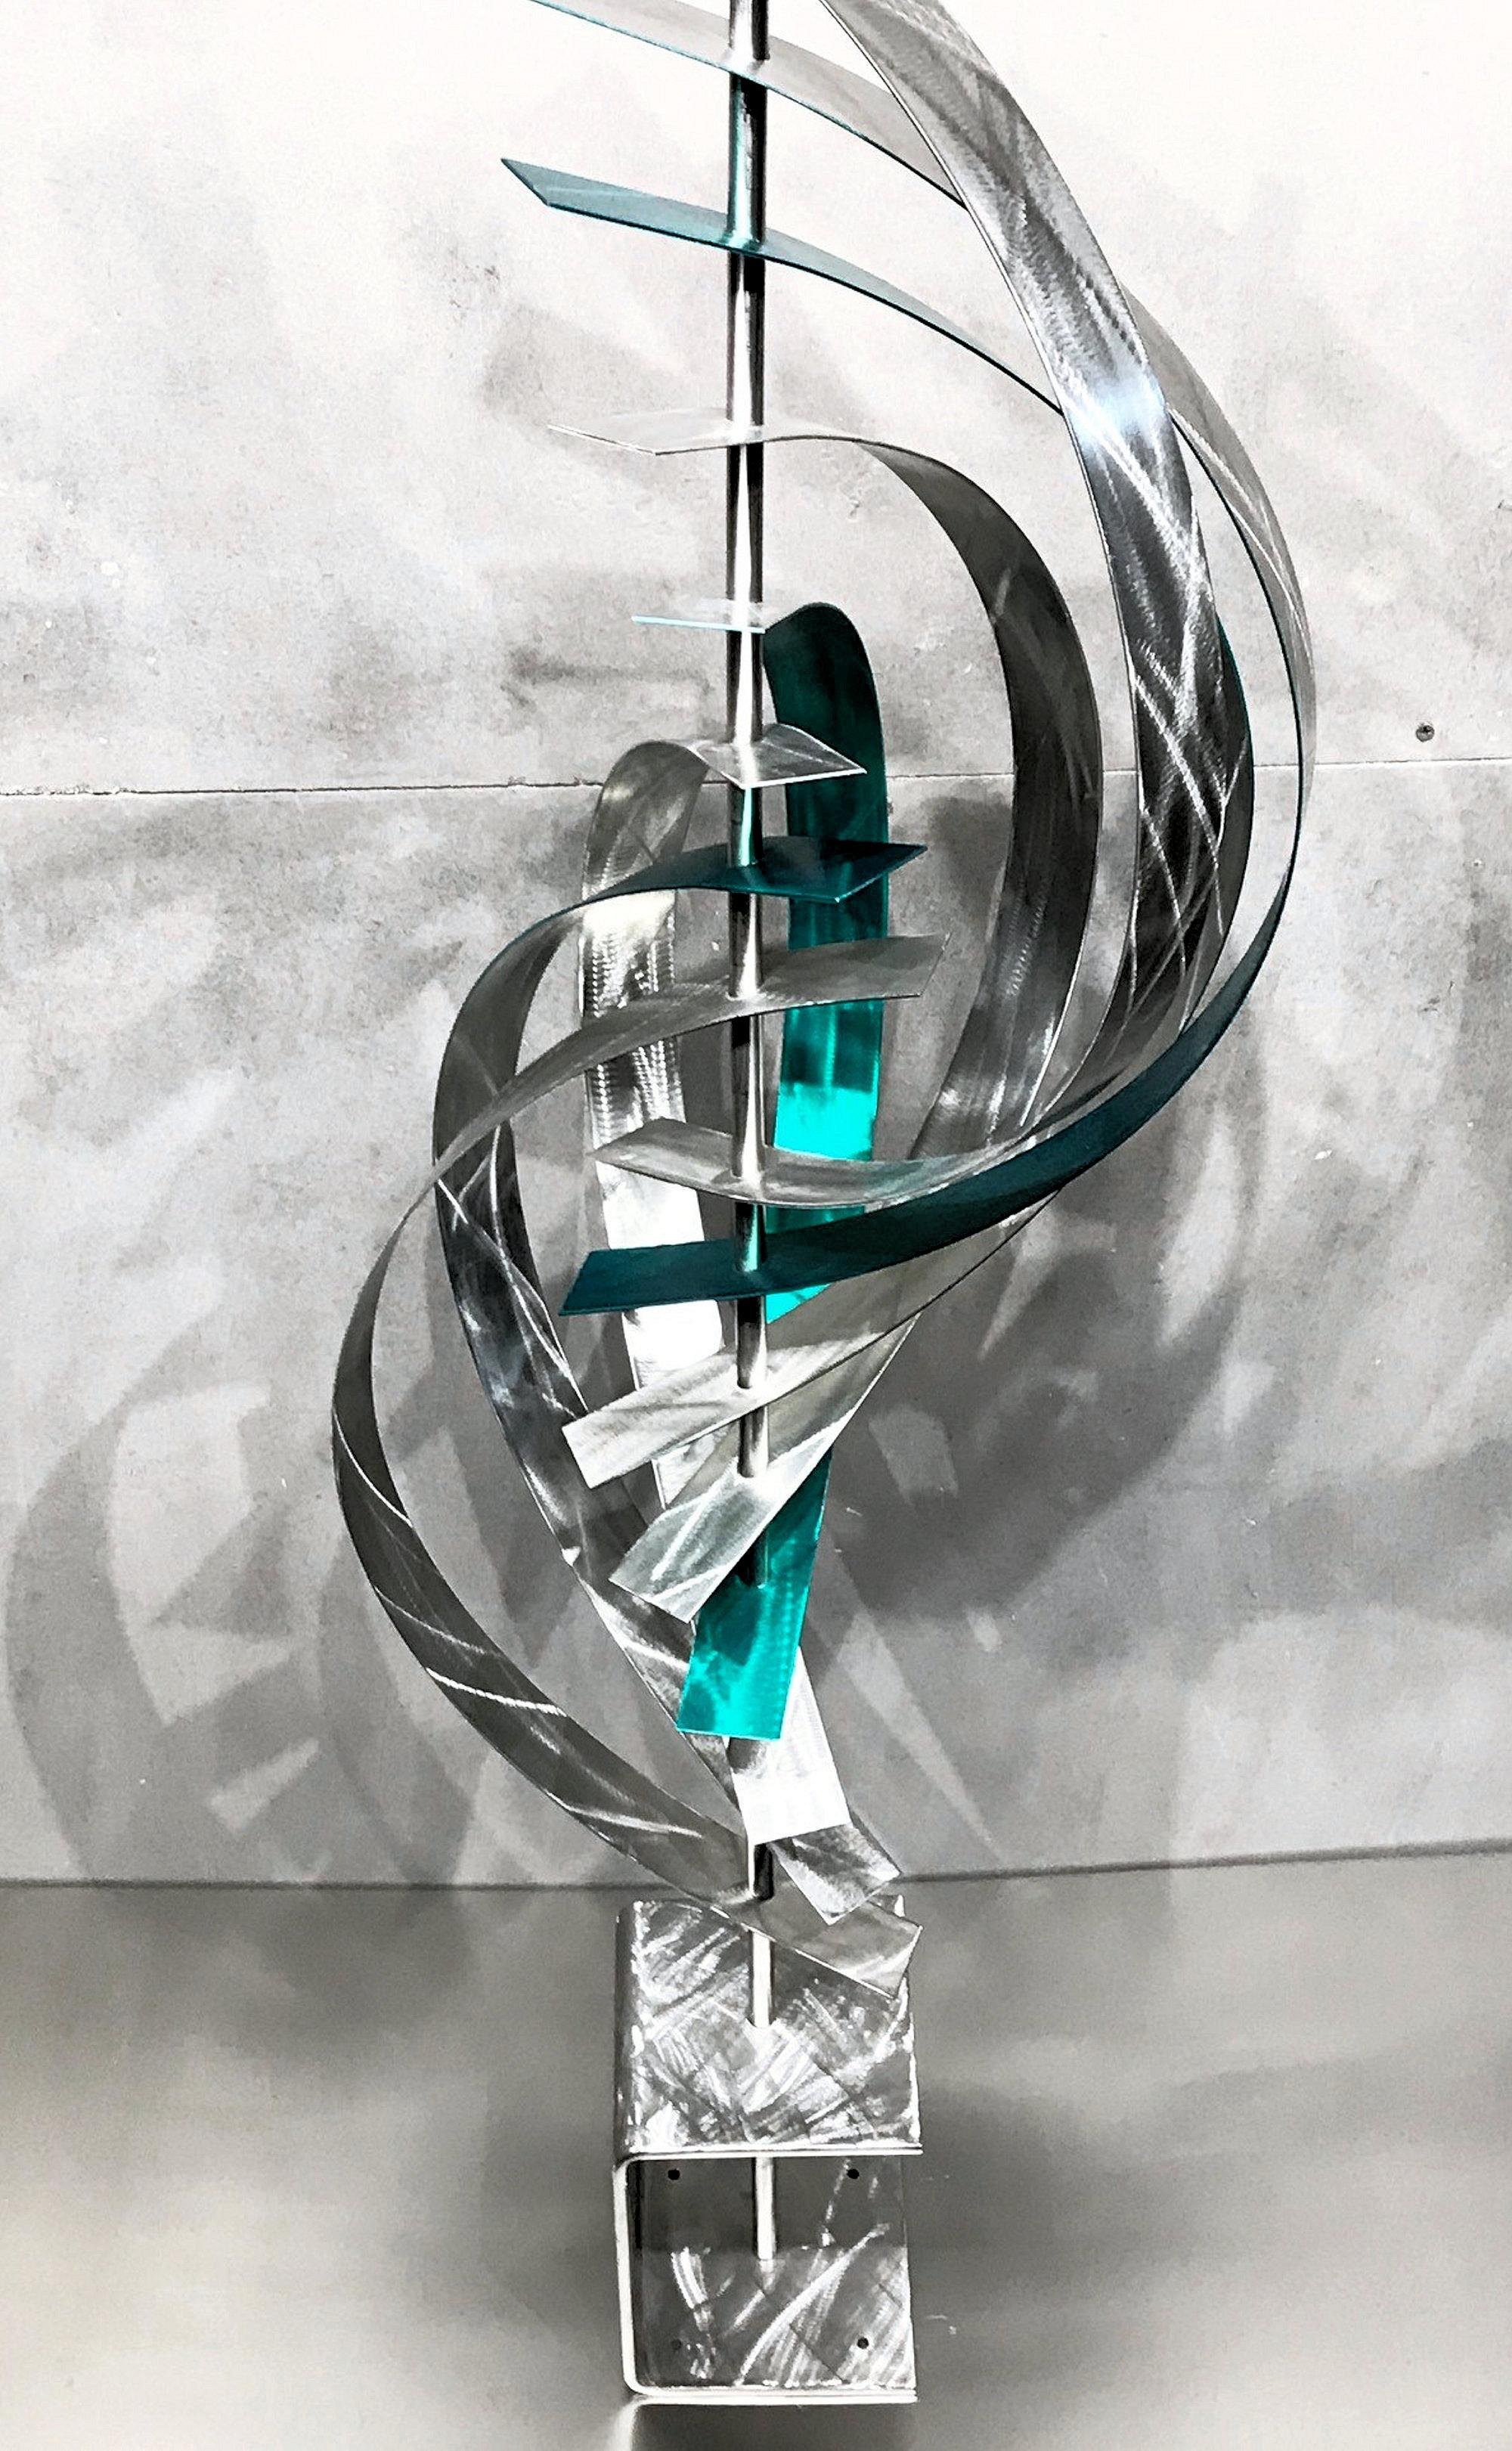 Description:  This sculpture consists of indoor/outdoor tinted stainless steel slats with unique grind patterns. Base consists of a single bent piece of stainless steel with grind pattern. This sculpture is an open-edition multiple original;